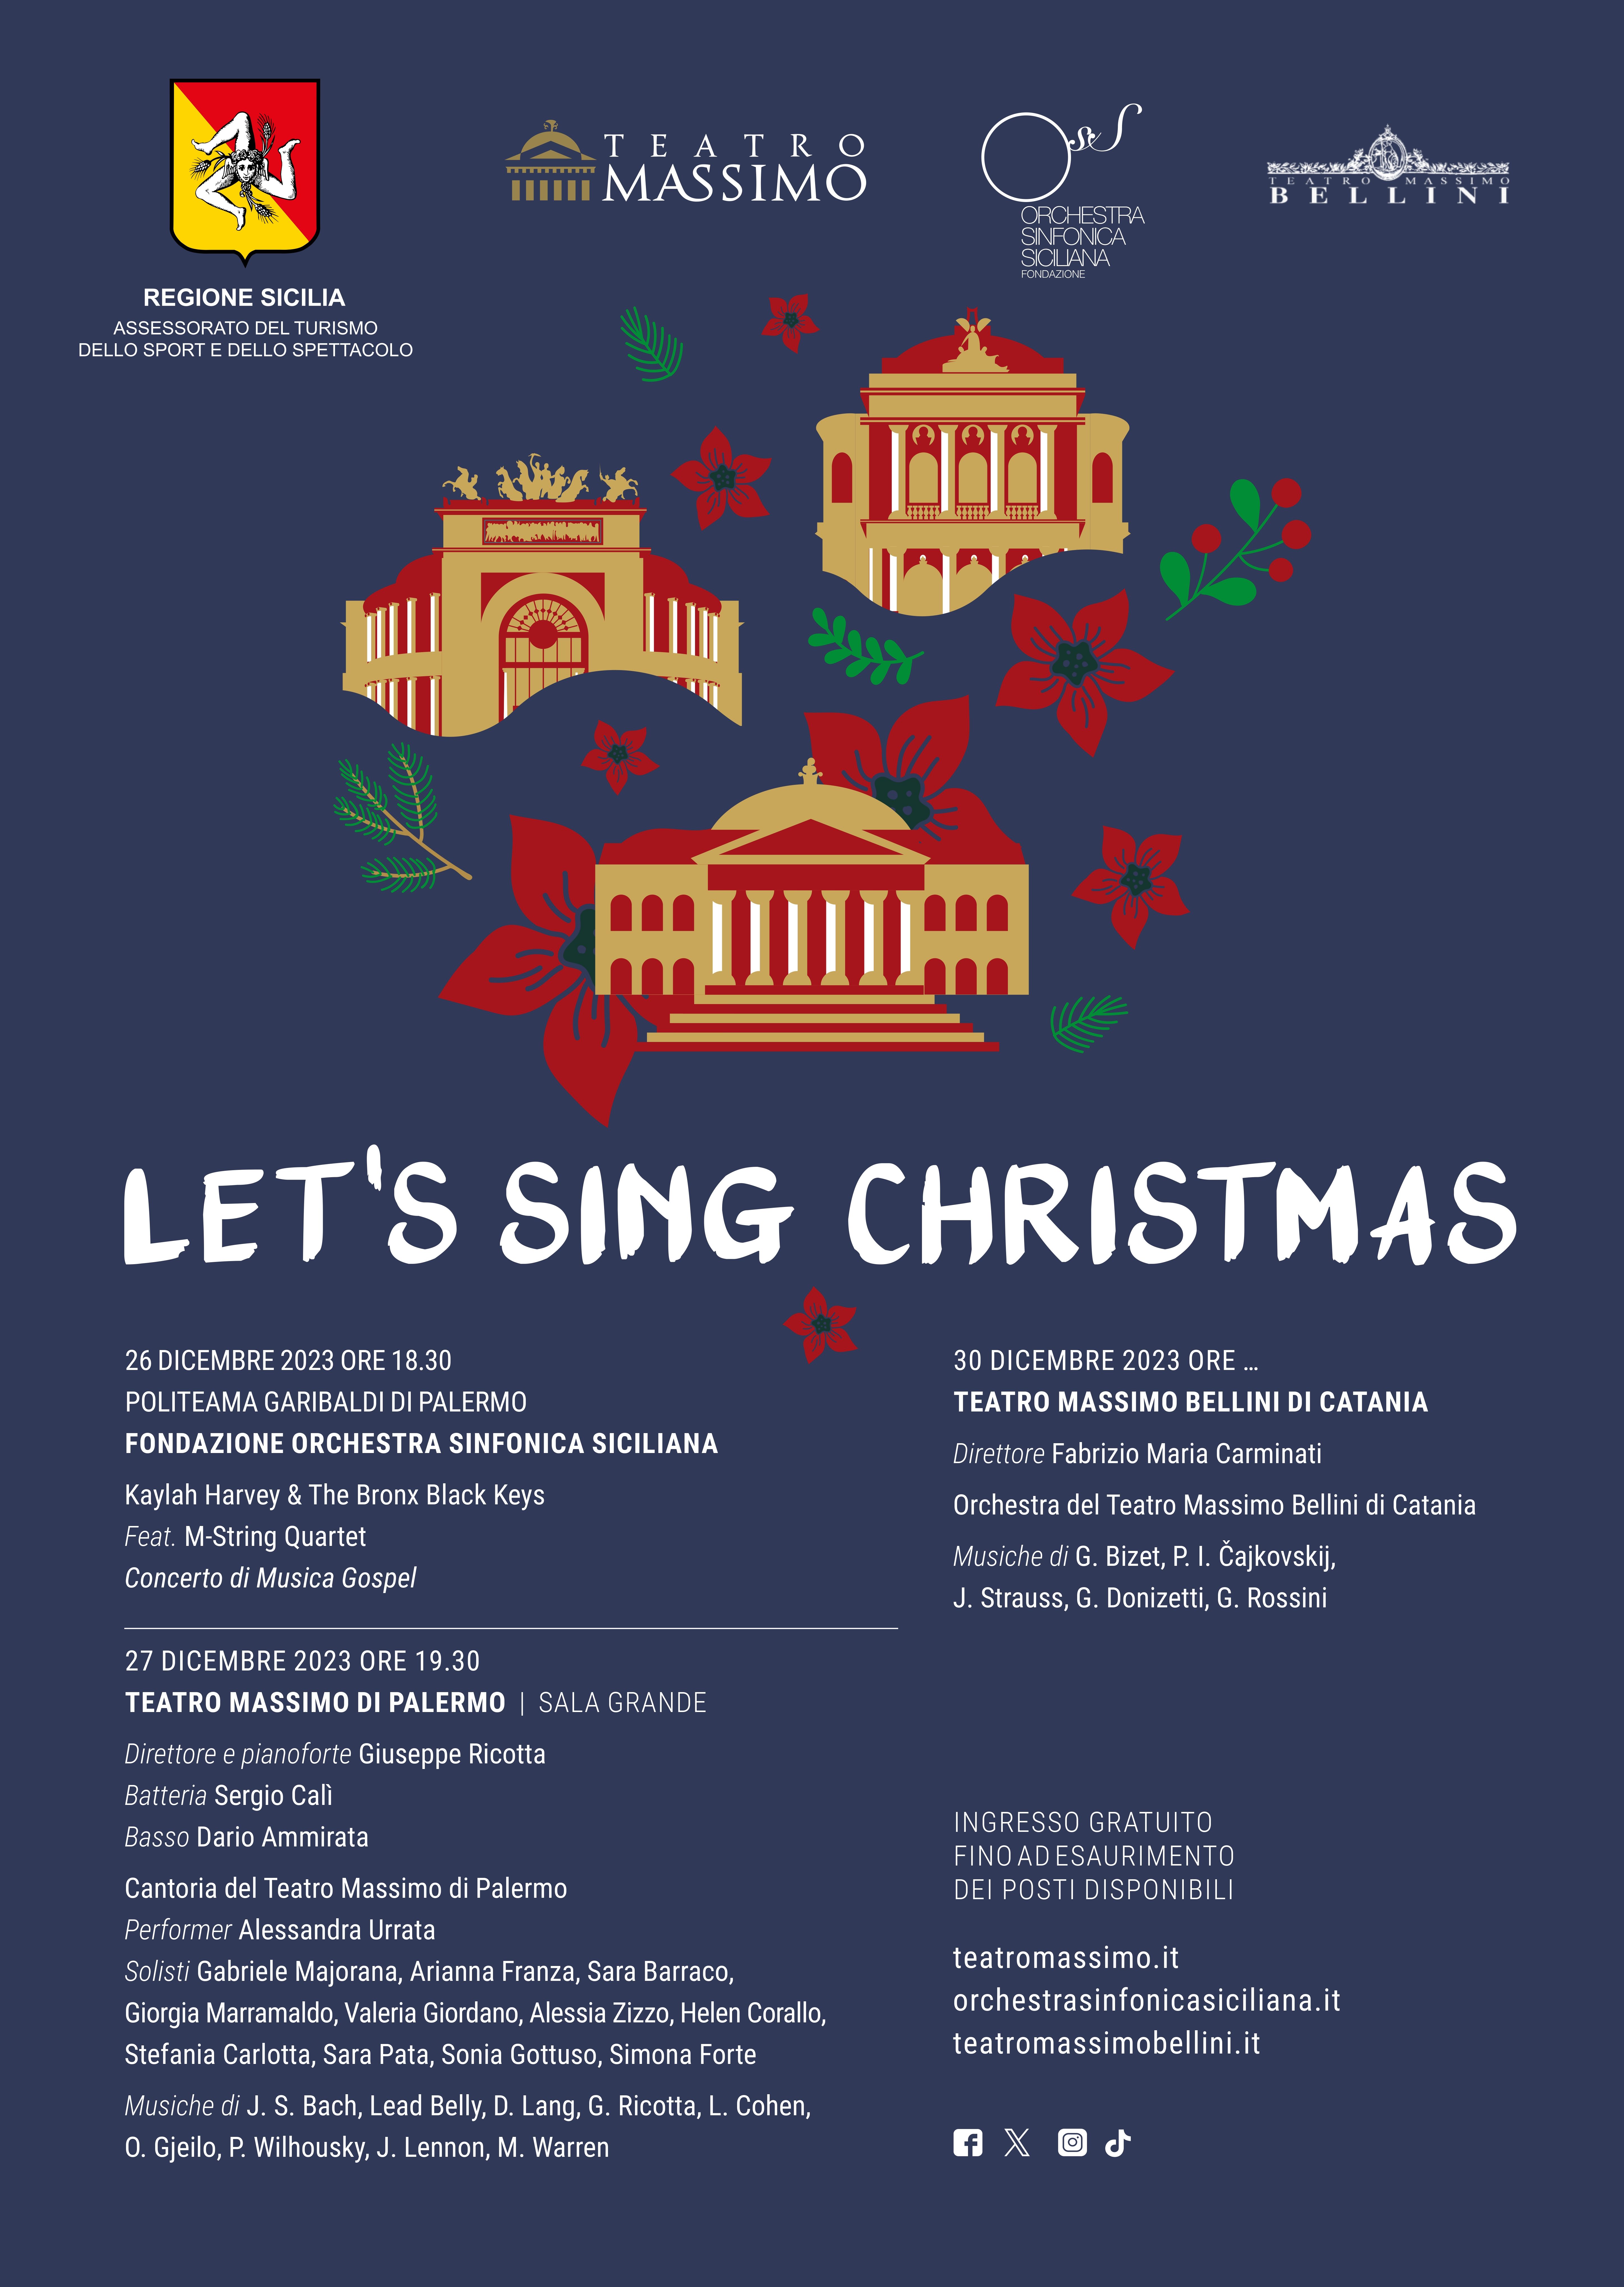 Let's sing Christmas